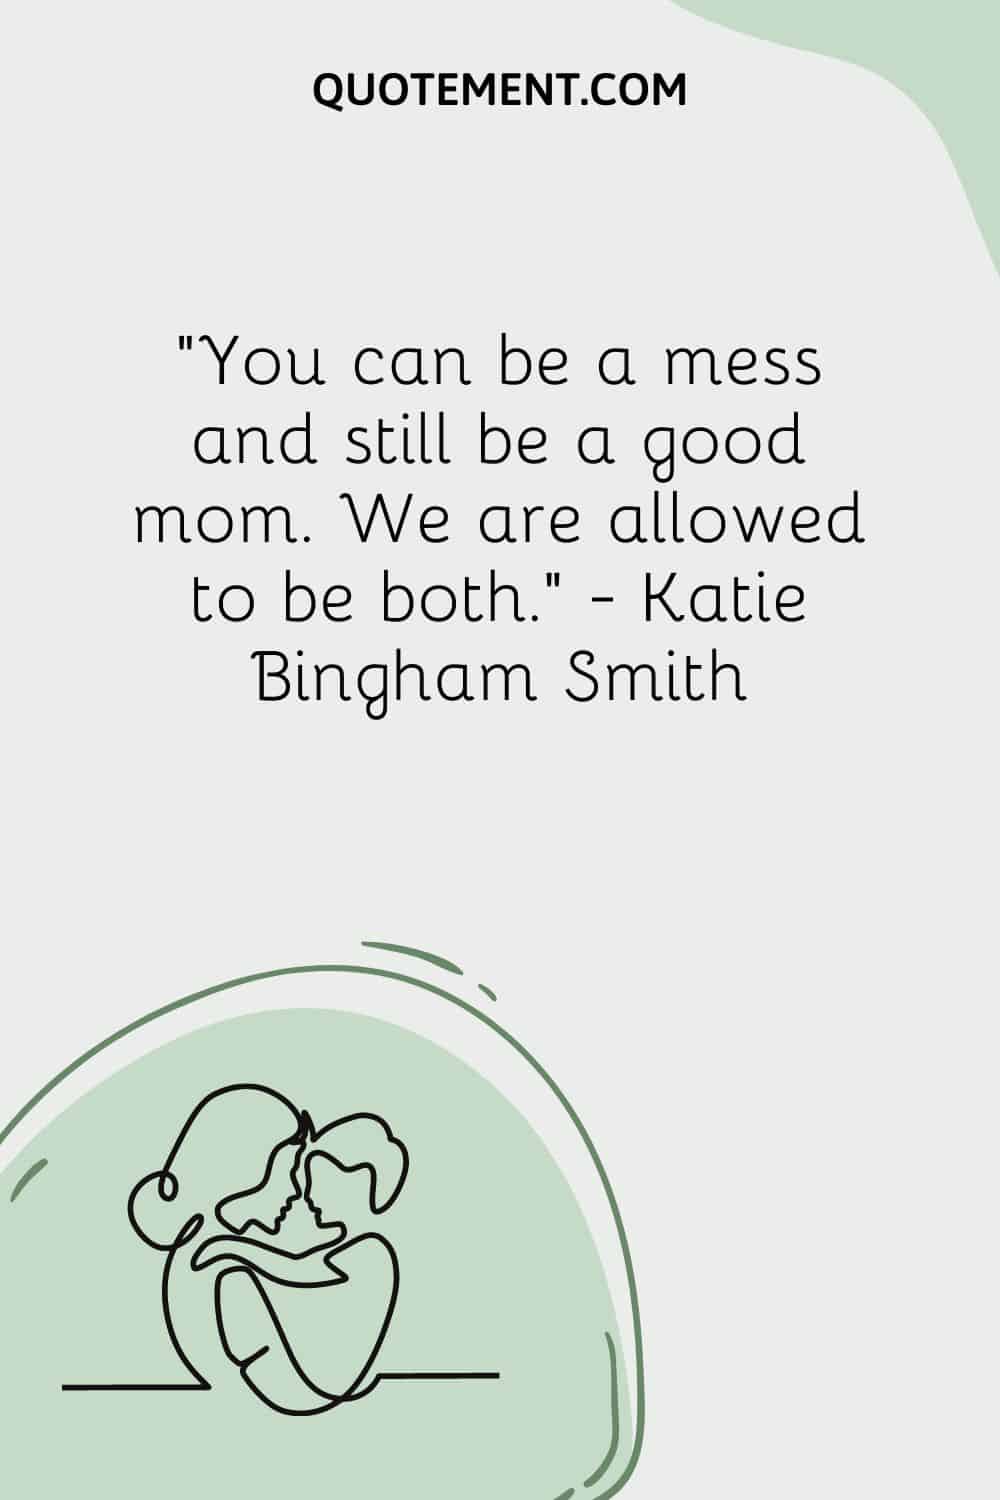 You can be a mess and still be a good mom. We are allowed to be both